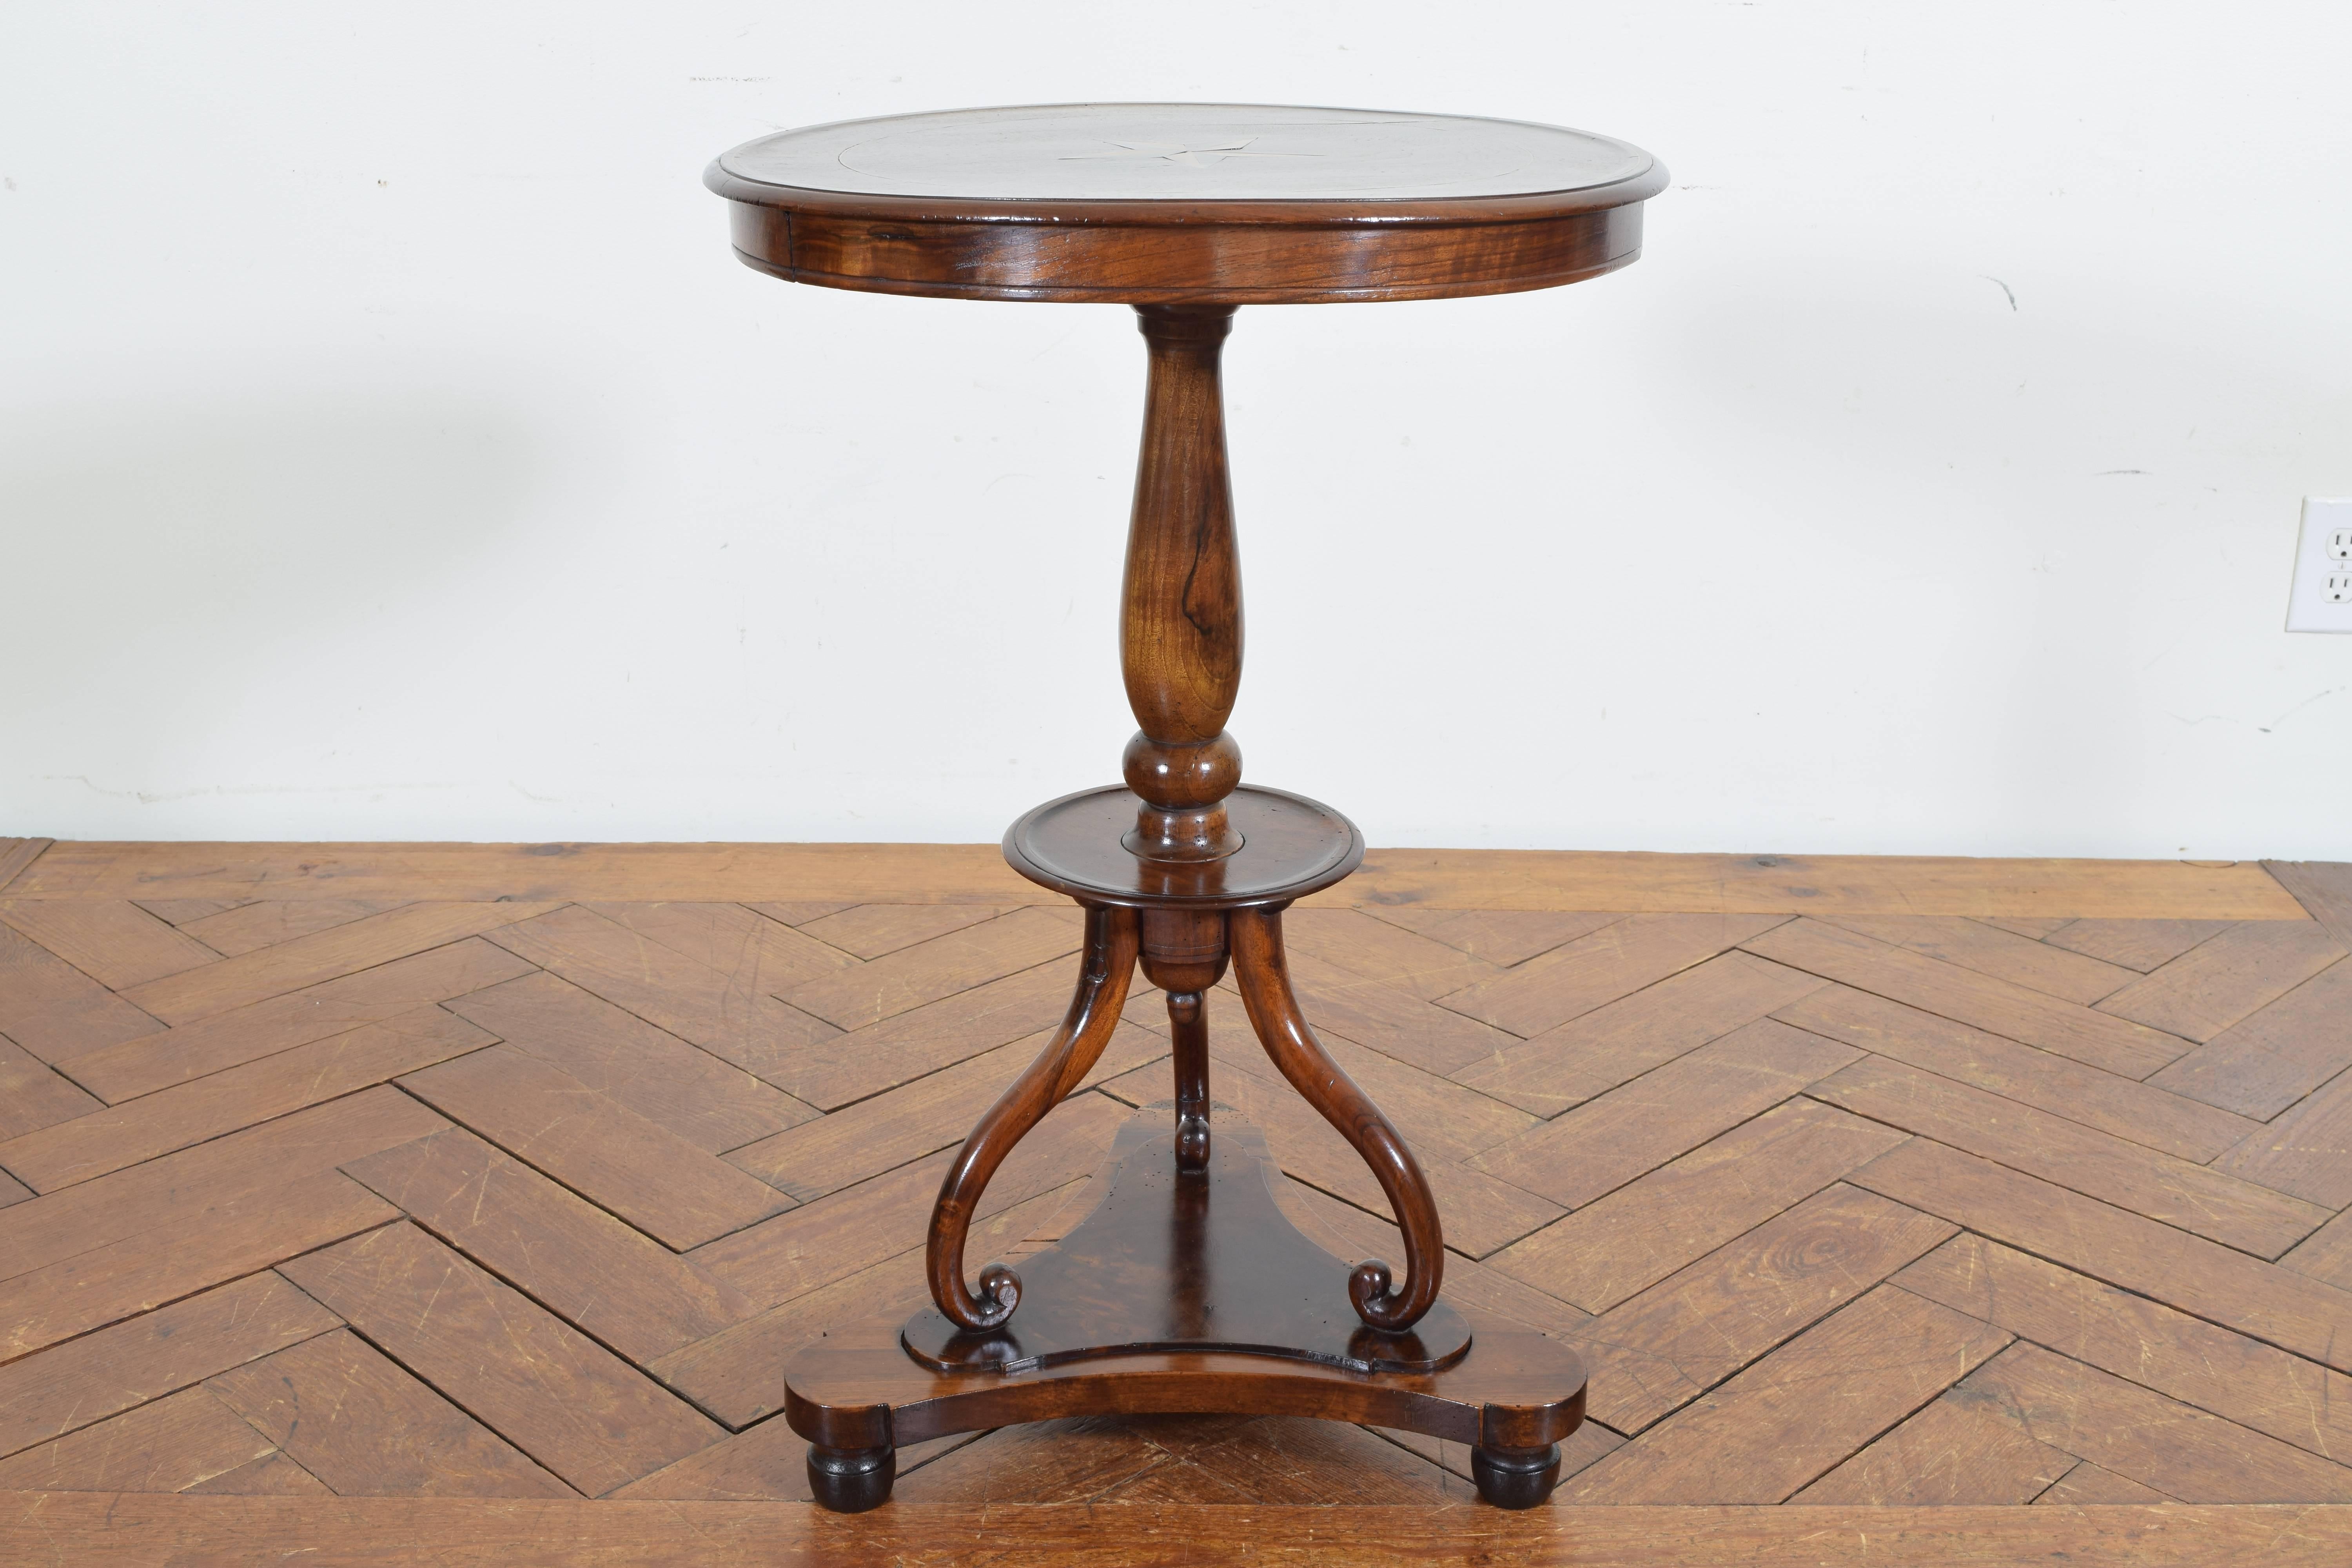 Having a round top with a central star inlay, band inlay, and a molded edge, the top housing two small drawers, raised on a turned standard with a lower tray section, the curved supports above a tripartite base raised on ball feet
2nd quarter 19th